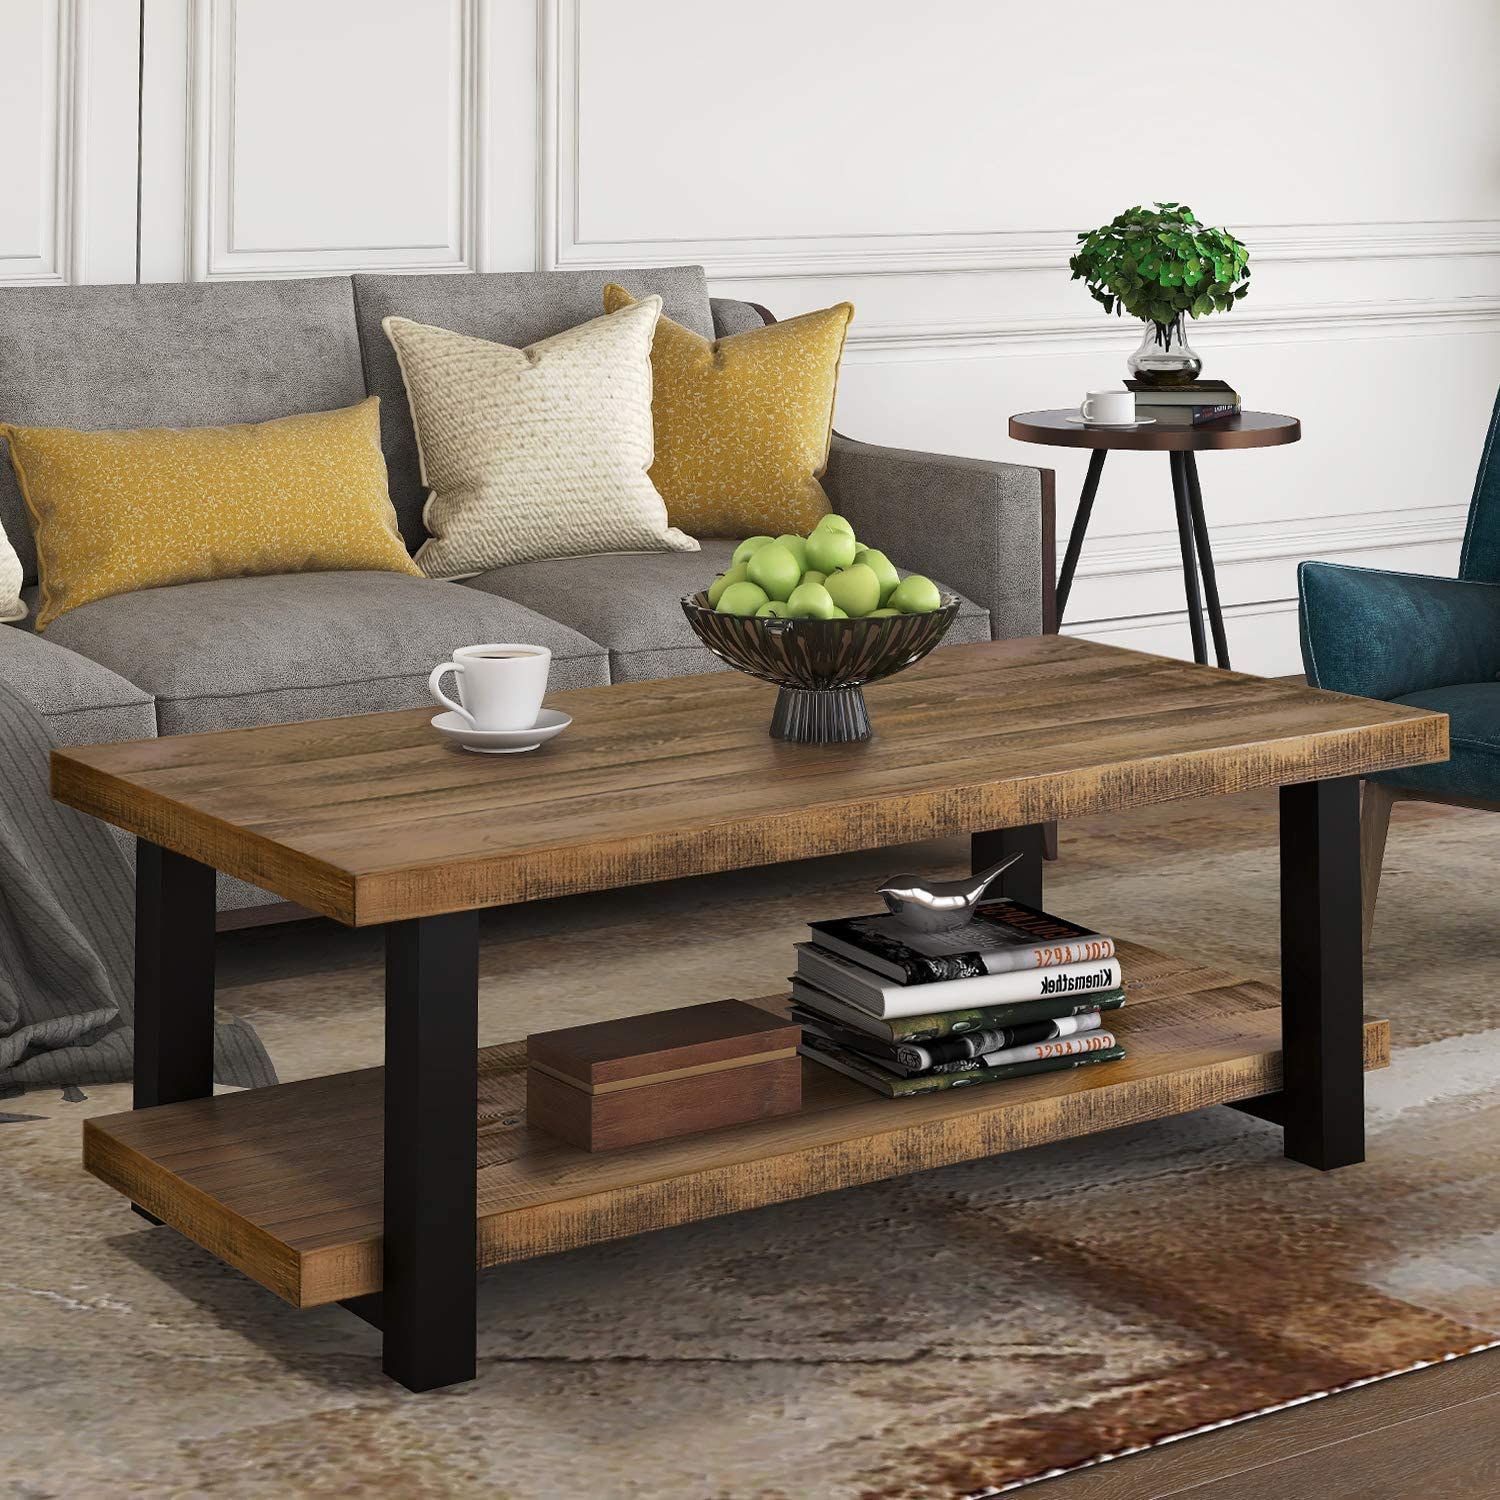 Choose The Perfect Style Coffee Table To Compliment Your Home – Coffee Pertaining To Coffee Tables With Solid Legs (View 14 of 20)